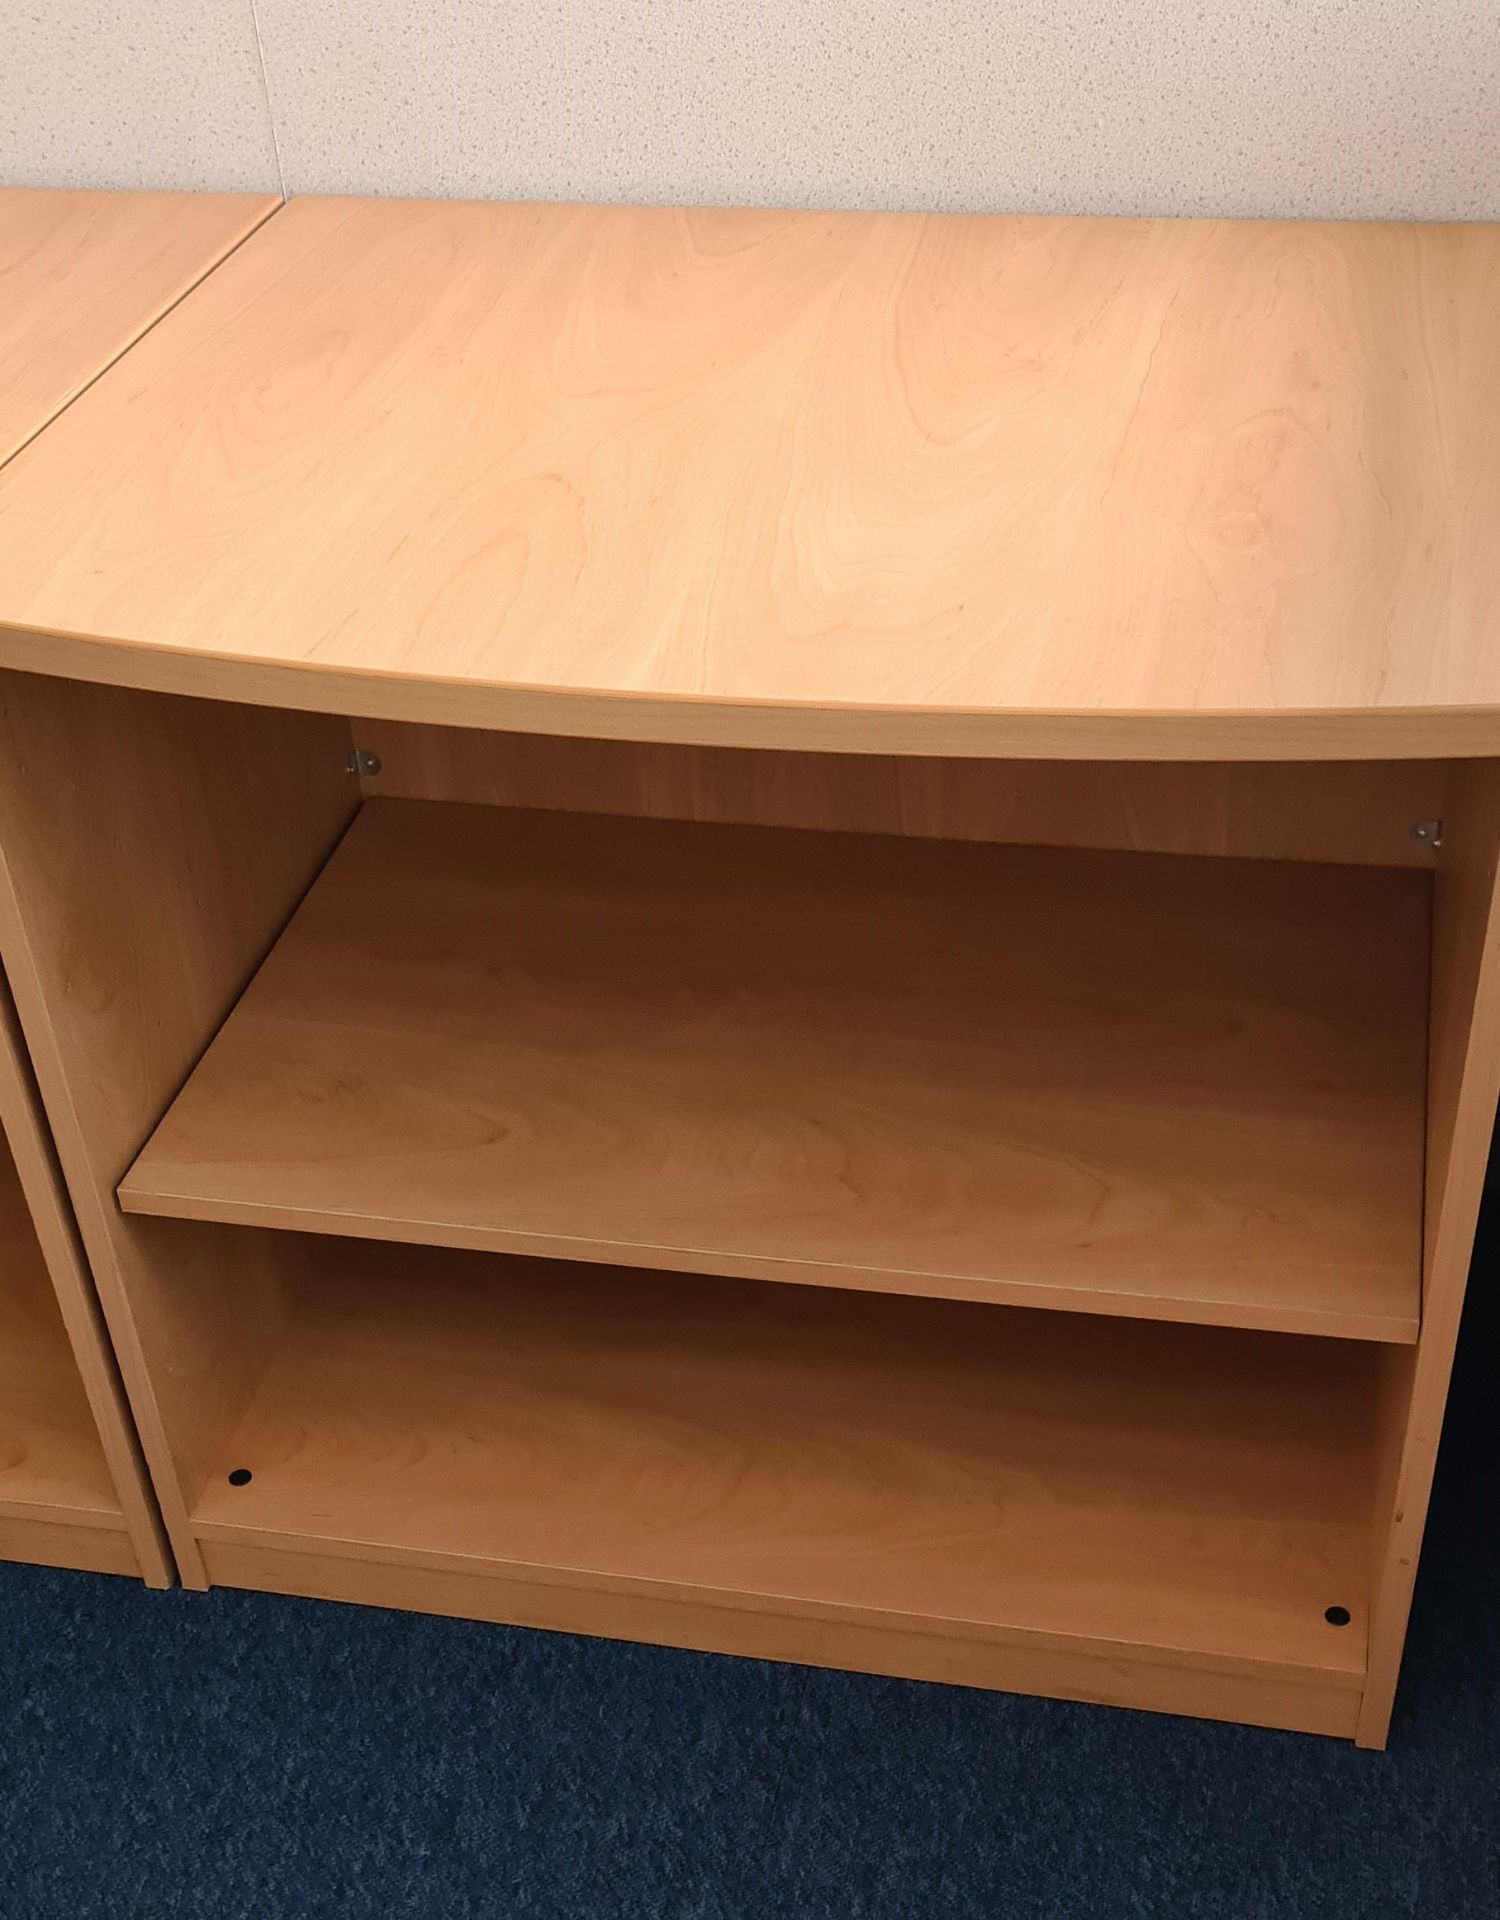 1 x Low Bookcase With Curved Front and Beech Finish - Ref: 1 x PK007 - Location: Site 2, Stafford,